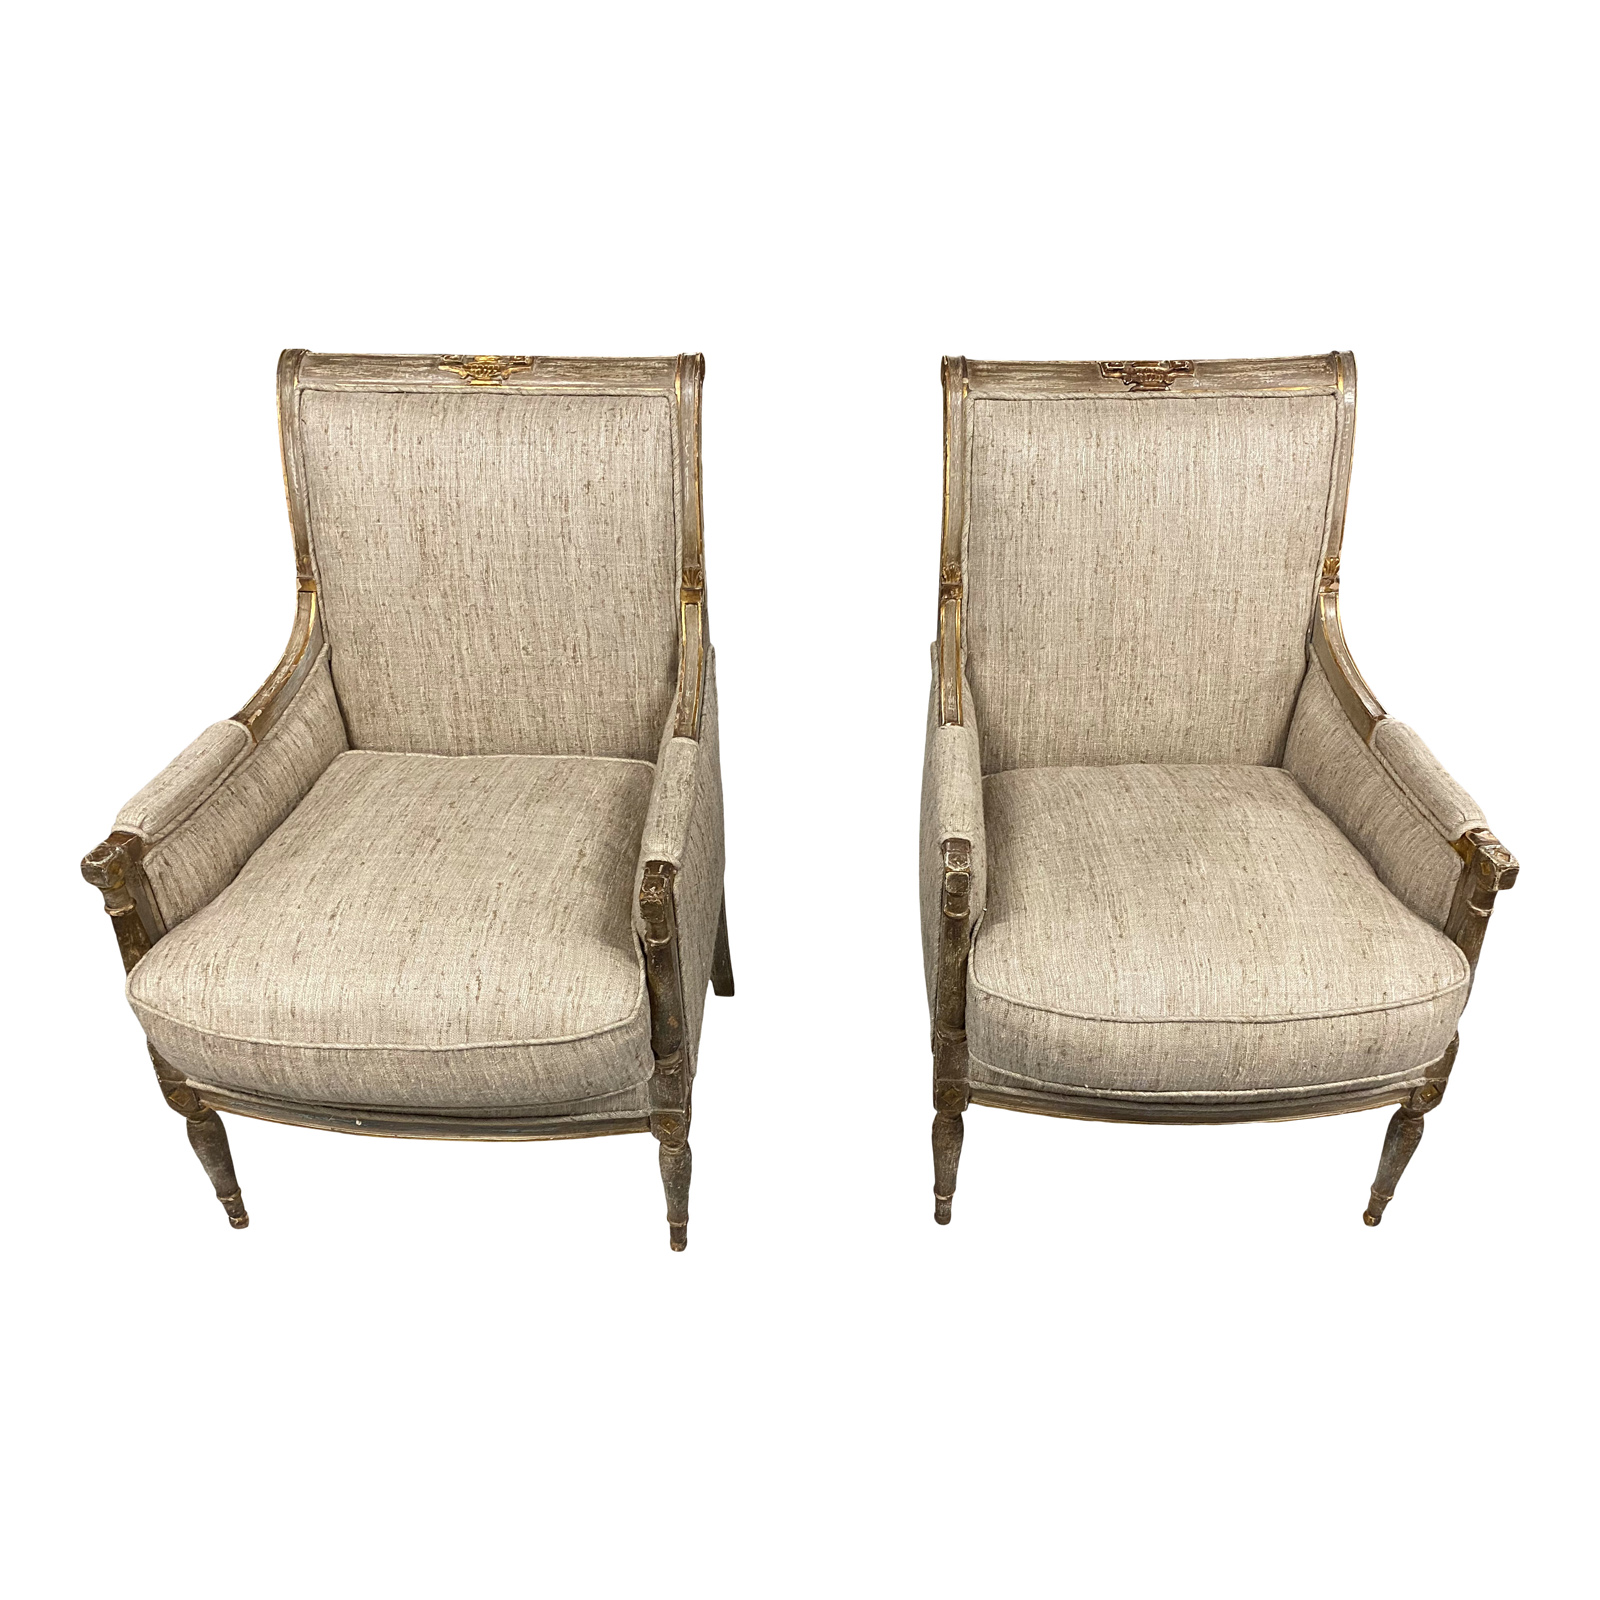 Pair of Louis XVI Style Bergère Chairs Upholstered in Raw Silk